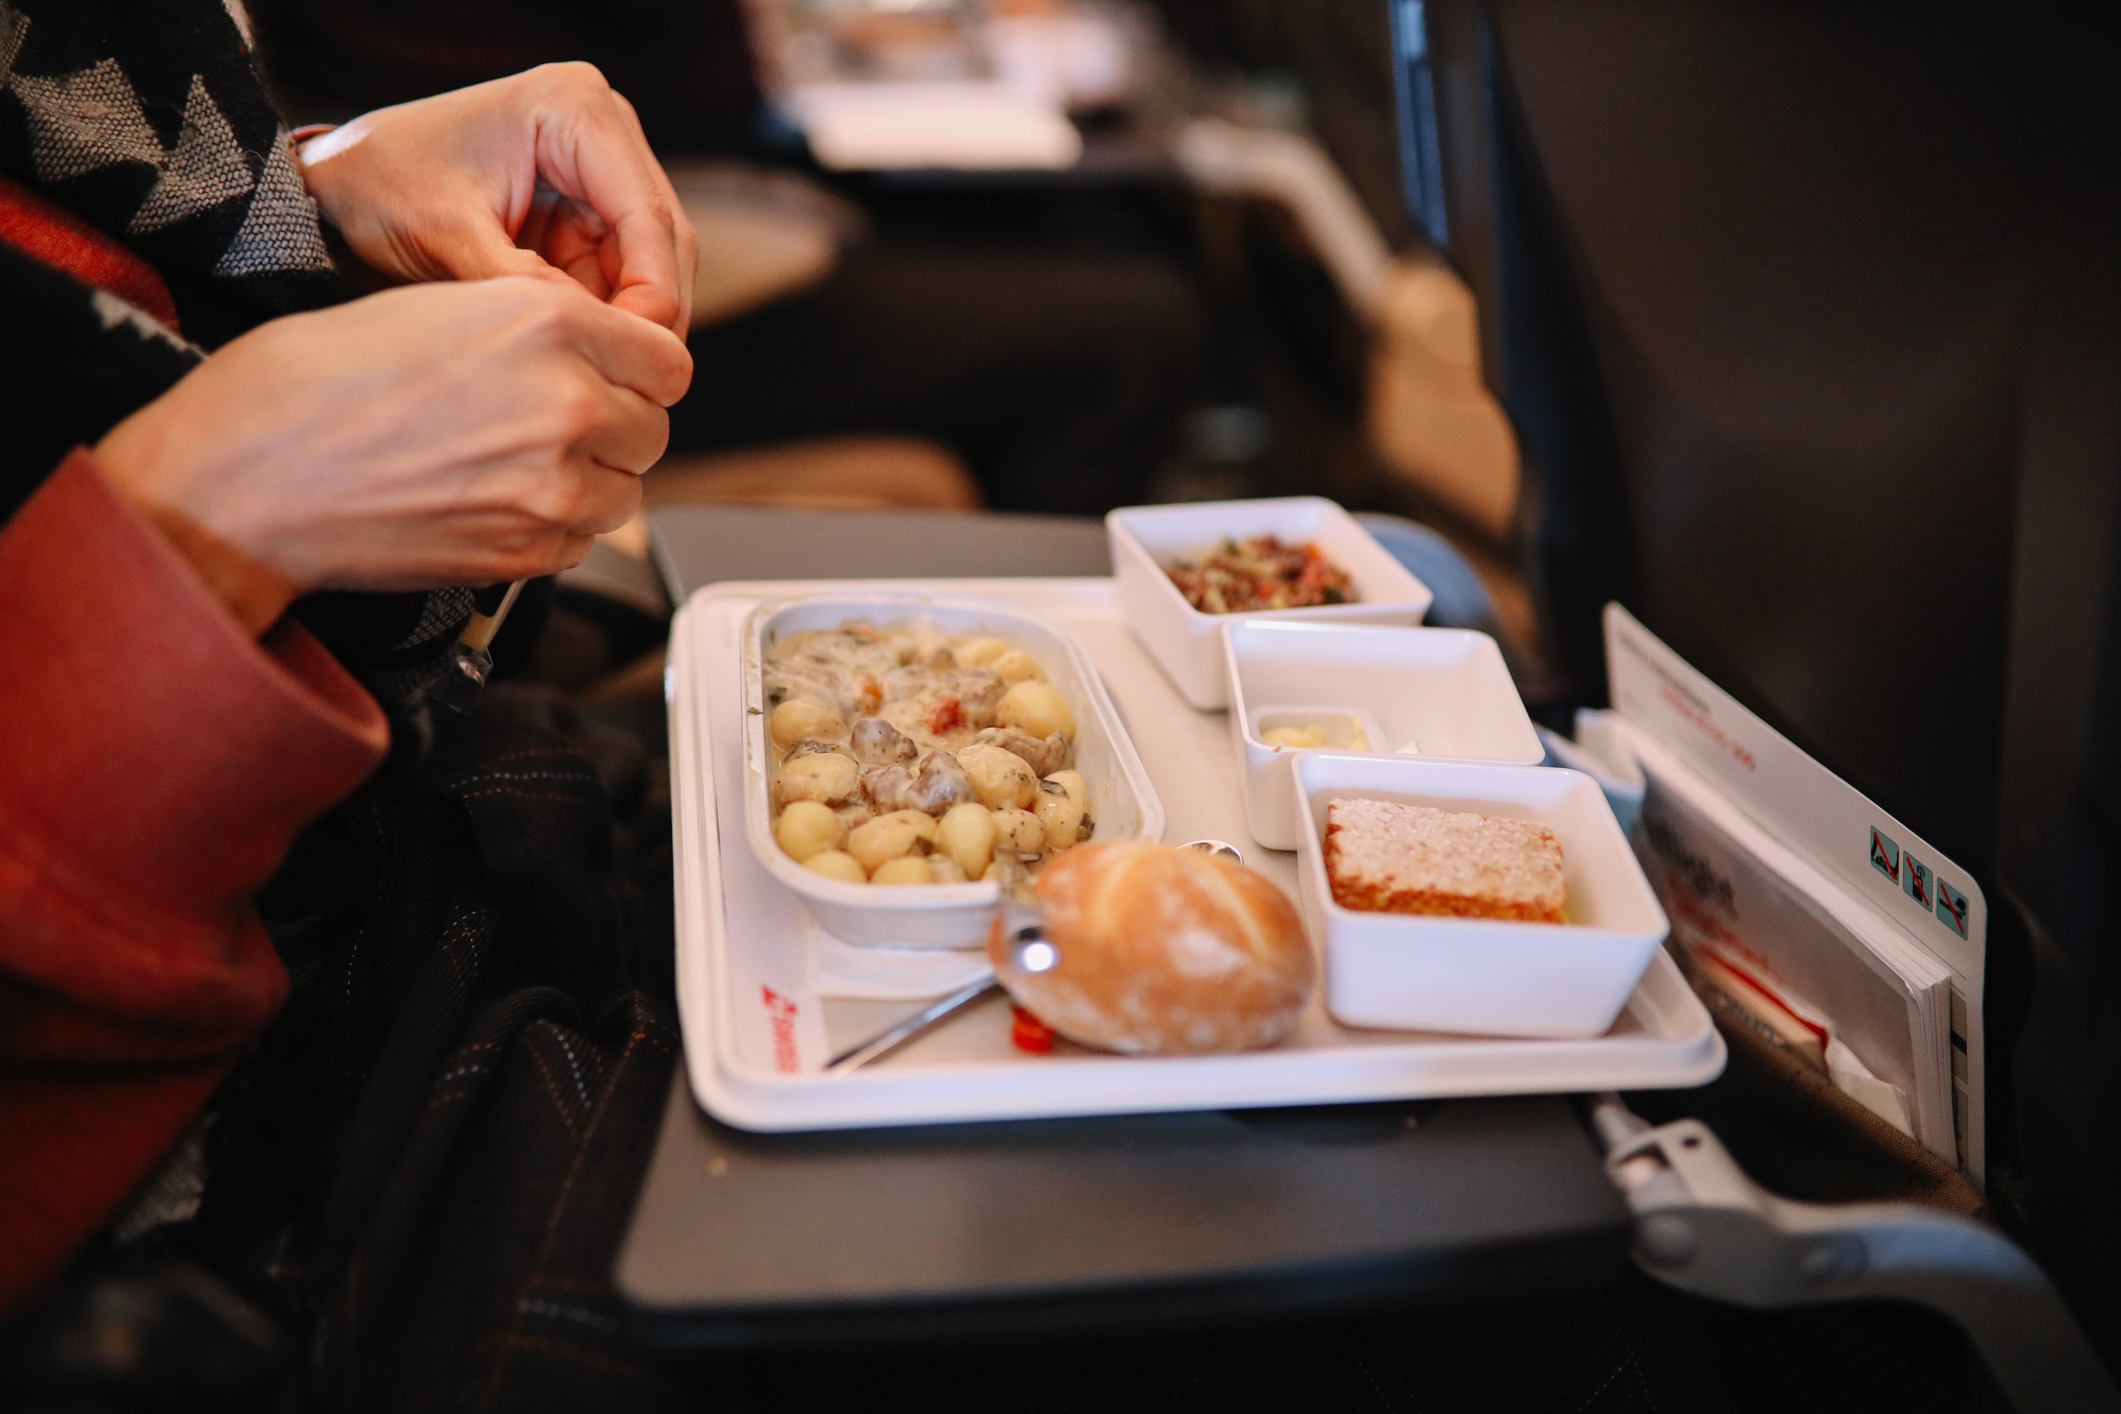 A person is preparing to eat an airline meal consisting of pasta, bread roll, dessert, and side dishes on a tray in an airplane